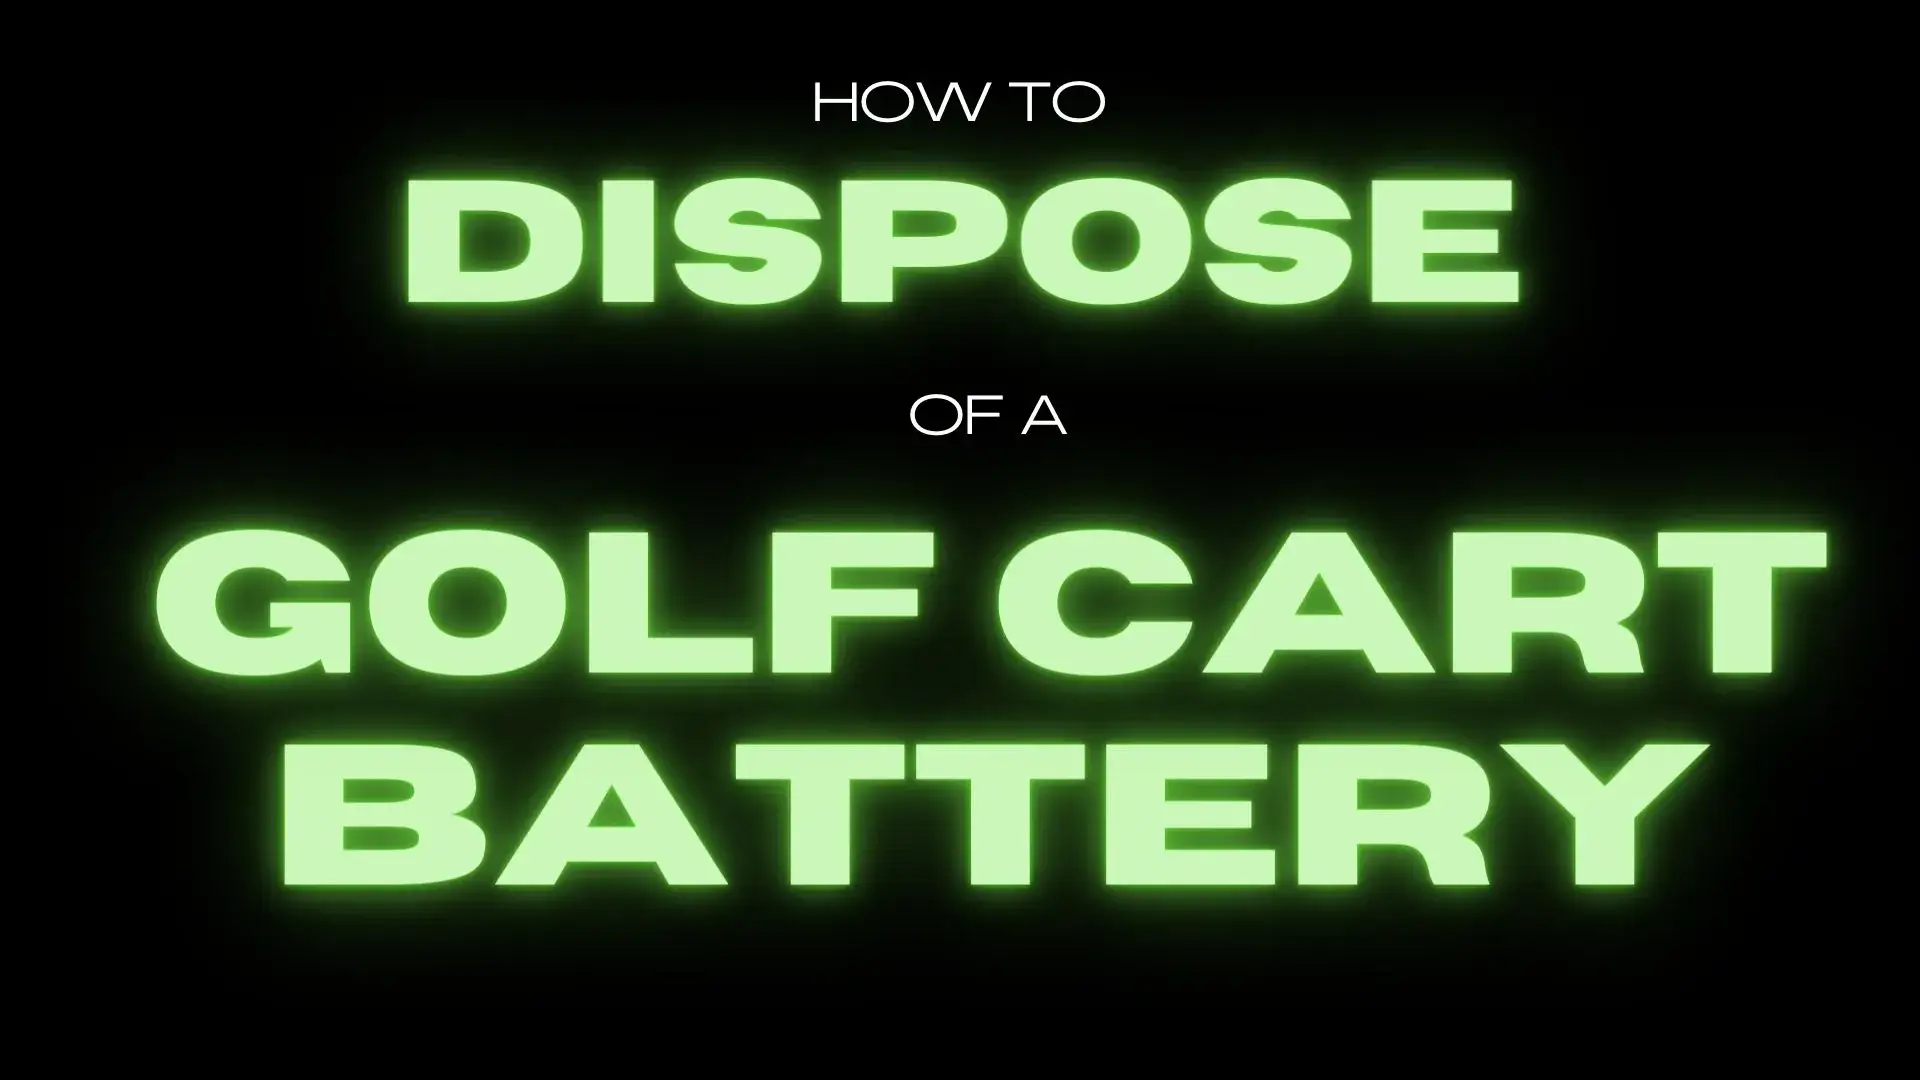 How to Dispose of a Golf Cart Battery